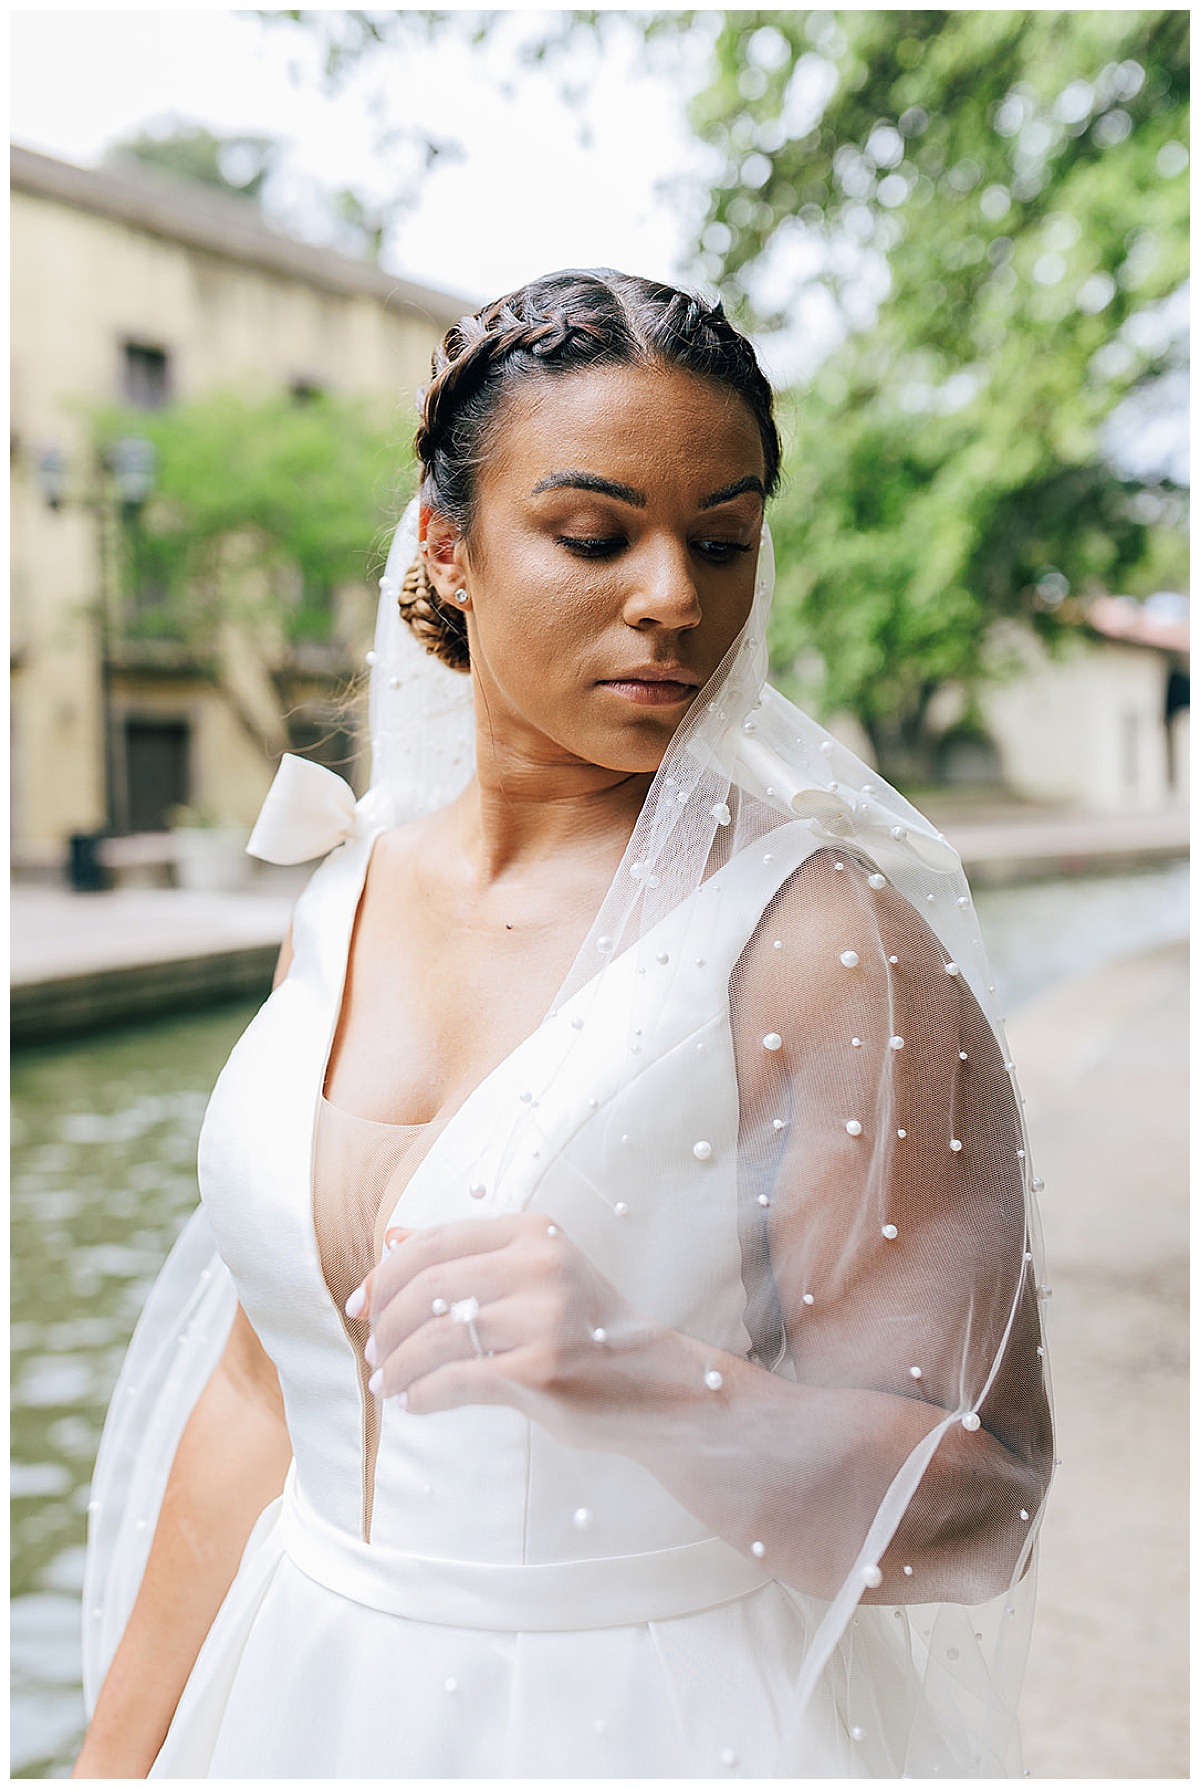 Gorgeous wedding veil is detailed with pearls for Mandalay Canal Elopement